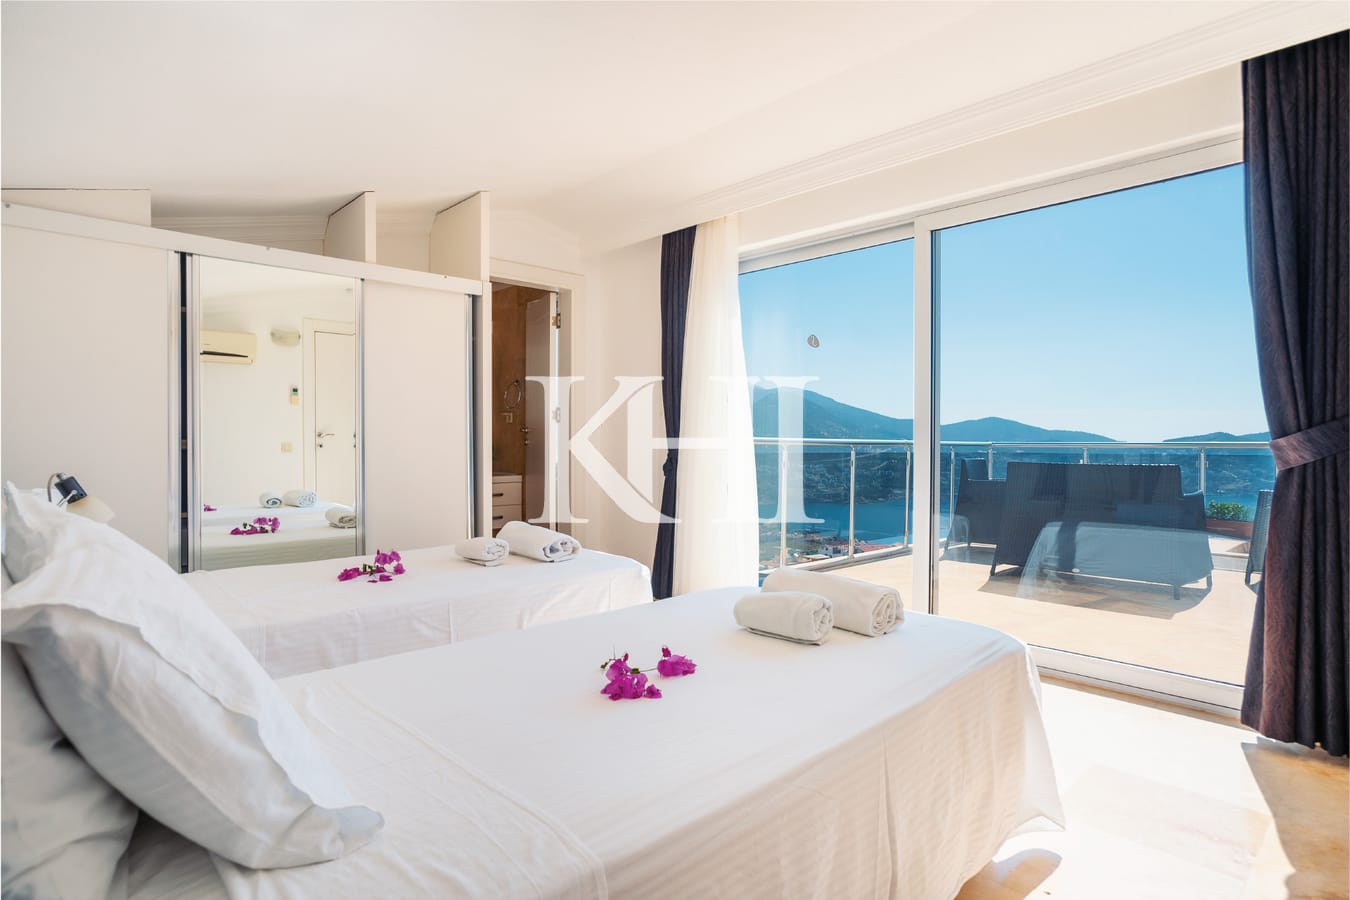 Detached Villa For Sale With Panoramic Kalkan View Slide Image 35